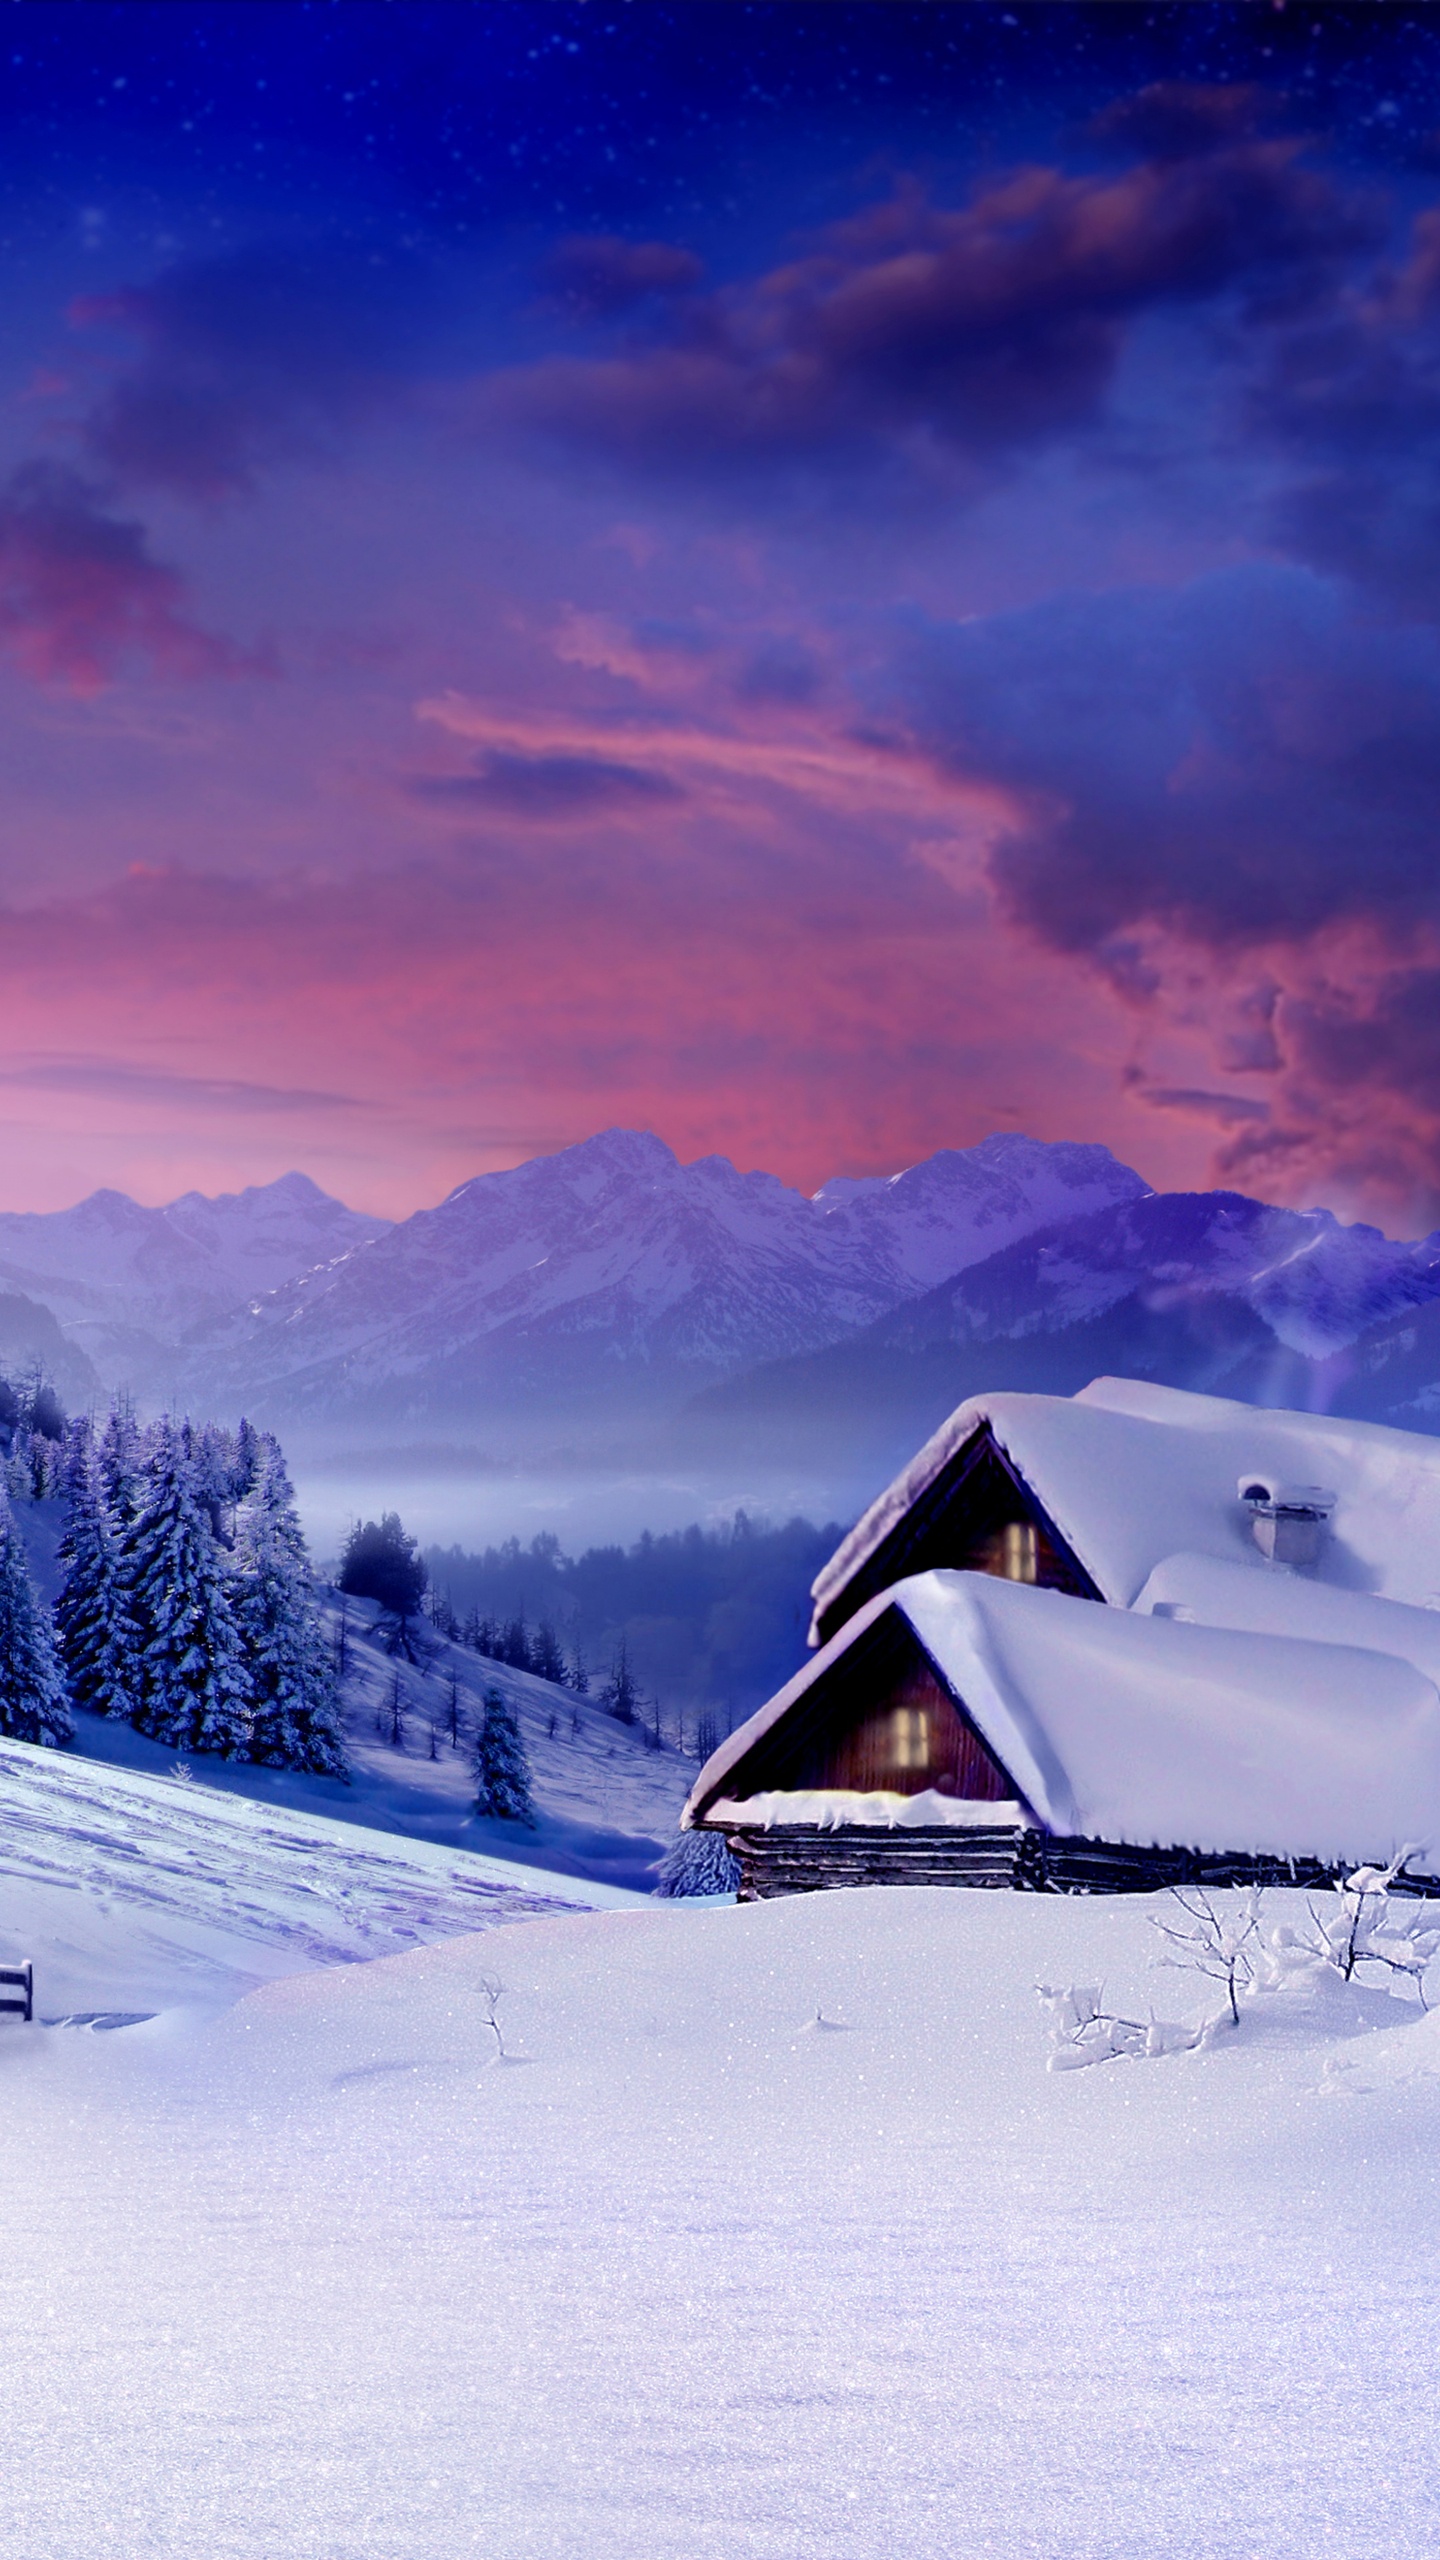 Brown Wooden House on Snow Covered Ground Near Trees and Mountains During Daytime. Wallpaper in 1440x2560 Resolution